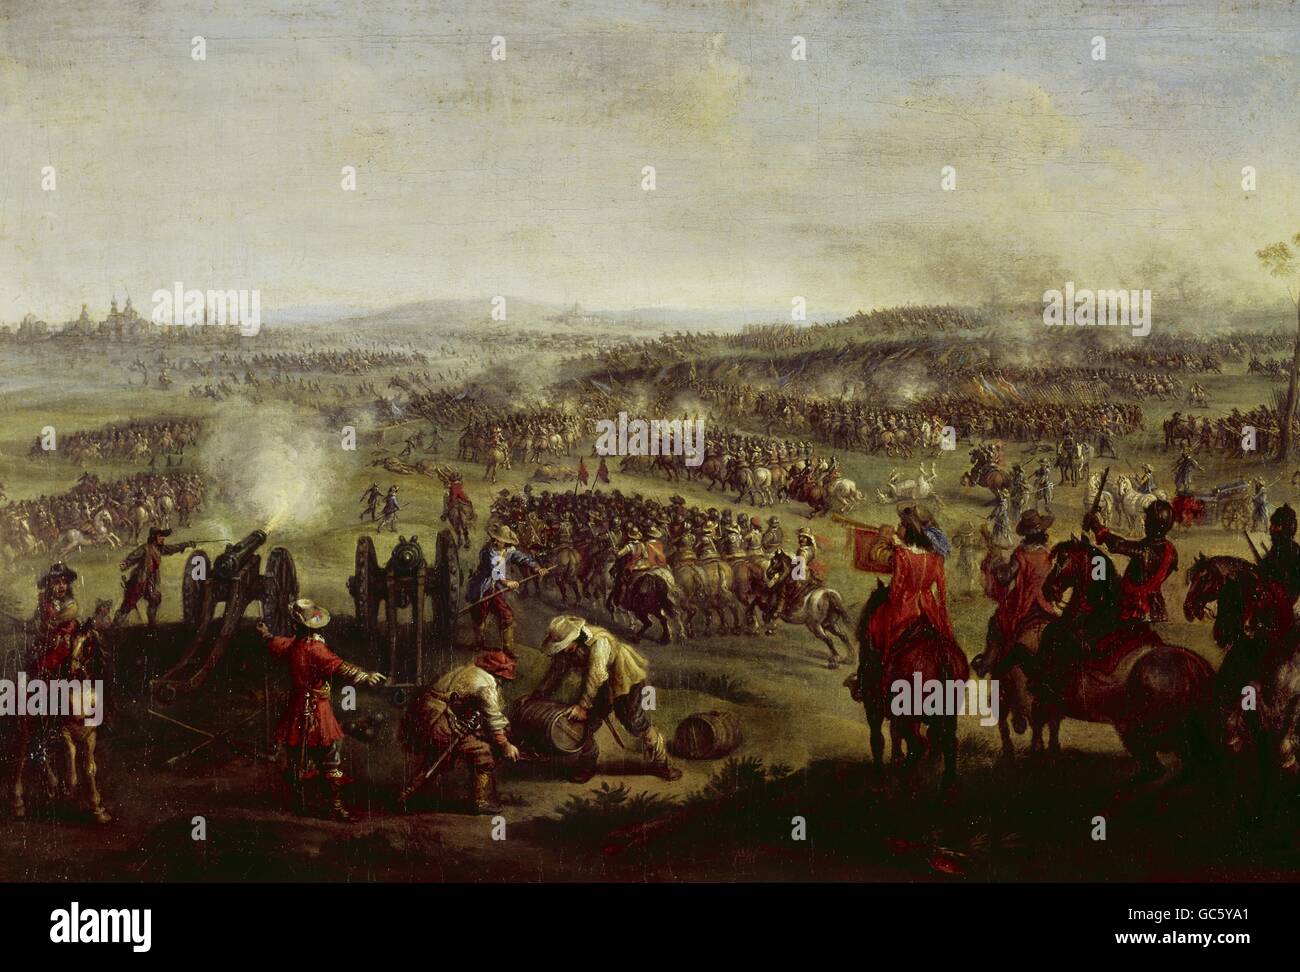 events, Thirty Years War 1618 - 1648, Bohemian-Palatinate War 1618 - 1626, Battle of White Mountain, 8.11.1620, painting, 17th century, Bavarian Army Museum, Ingolstadt, Imperial Army, Bohemian Uprising, Catholic League, cavalry, artillery, cannon, fine arts, baroque, Bohemian - Palatinate, soldiers, Bohemia, Czechia, historic, historical, people, Additional-Rights-Clearences-Not Available Stock Photo